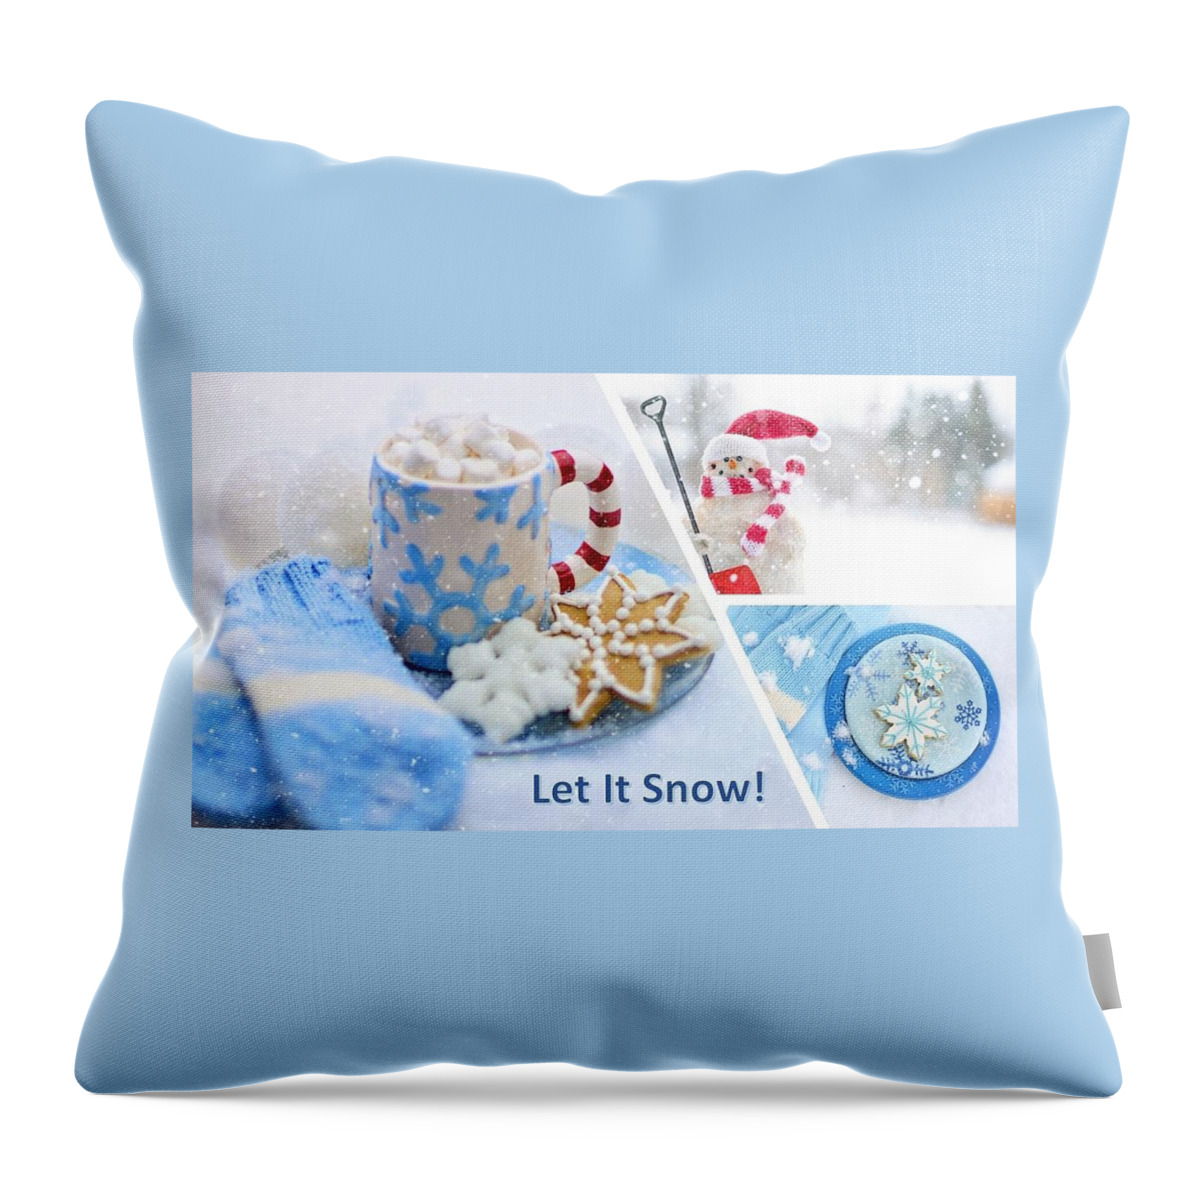 Snow Throw Pillow featuring the photograph Let It Snow in Blue Tones by Nancy Ayanna Wyatt